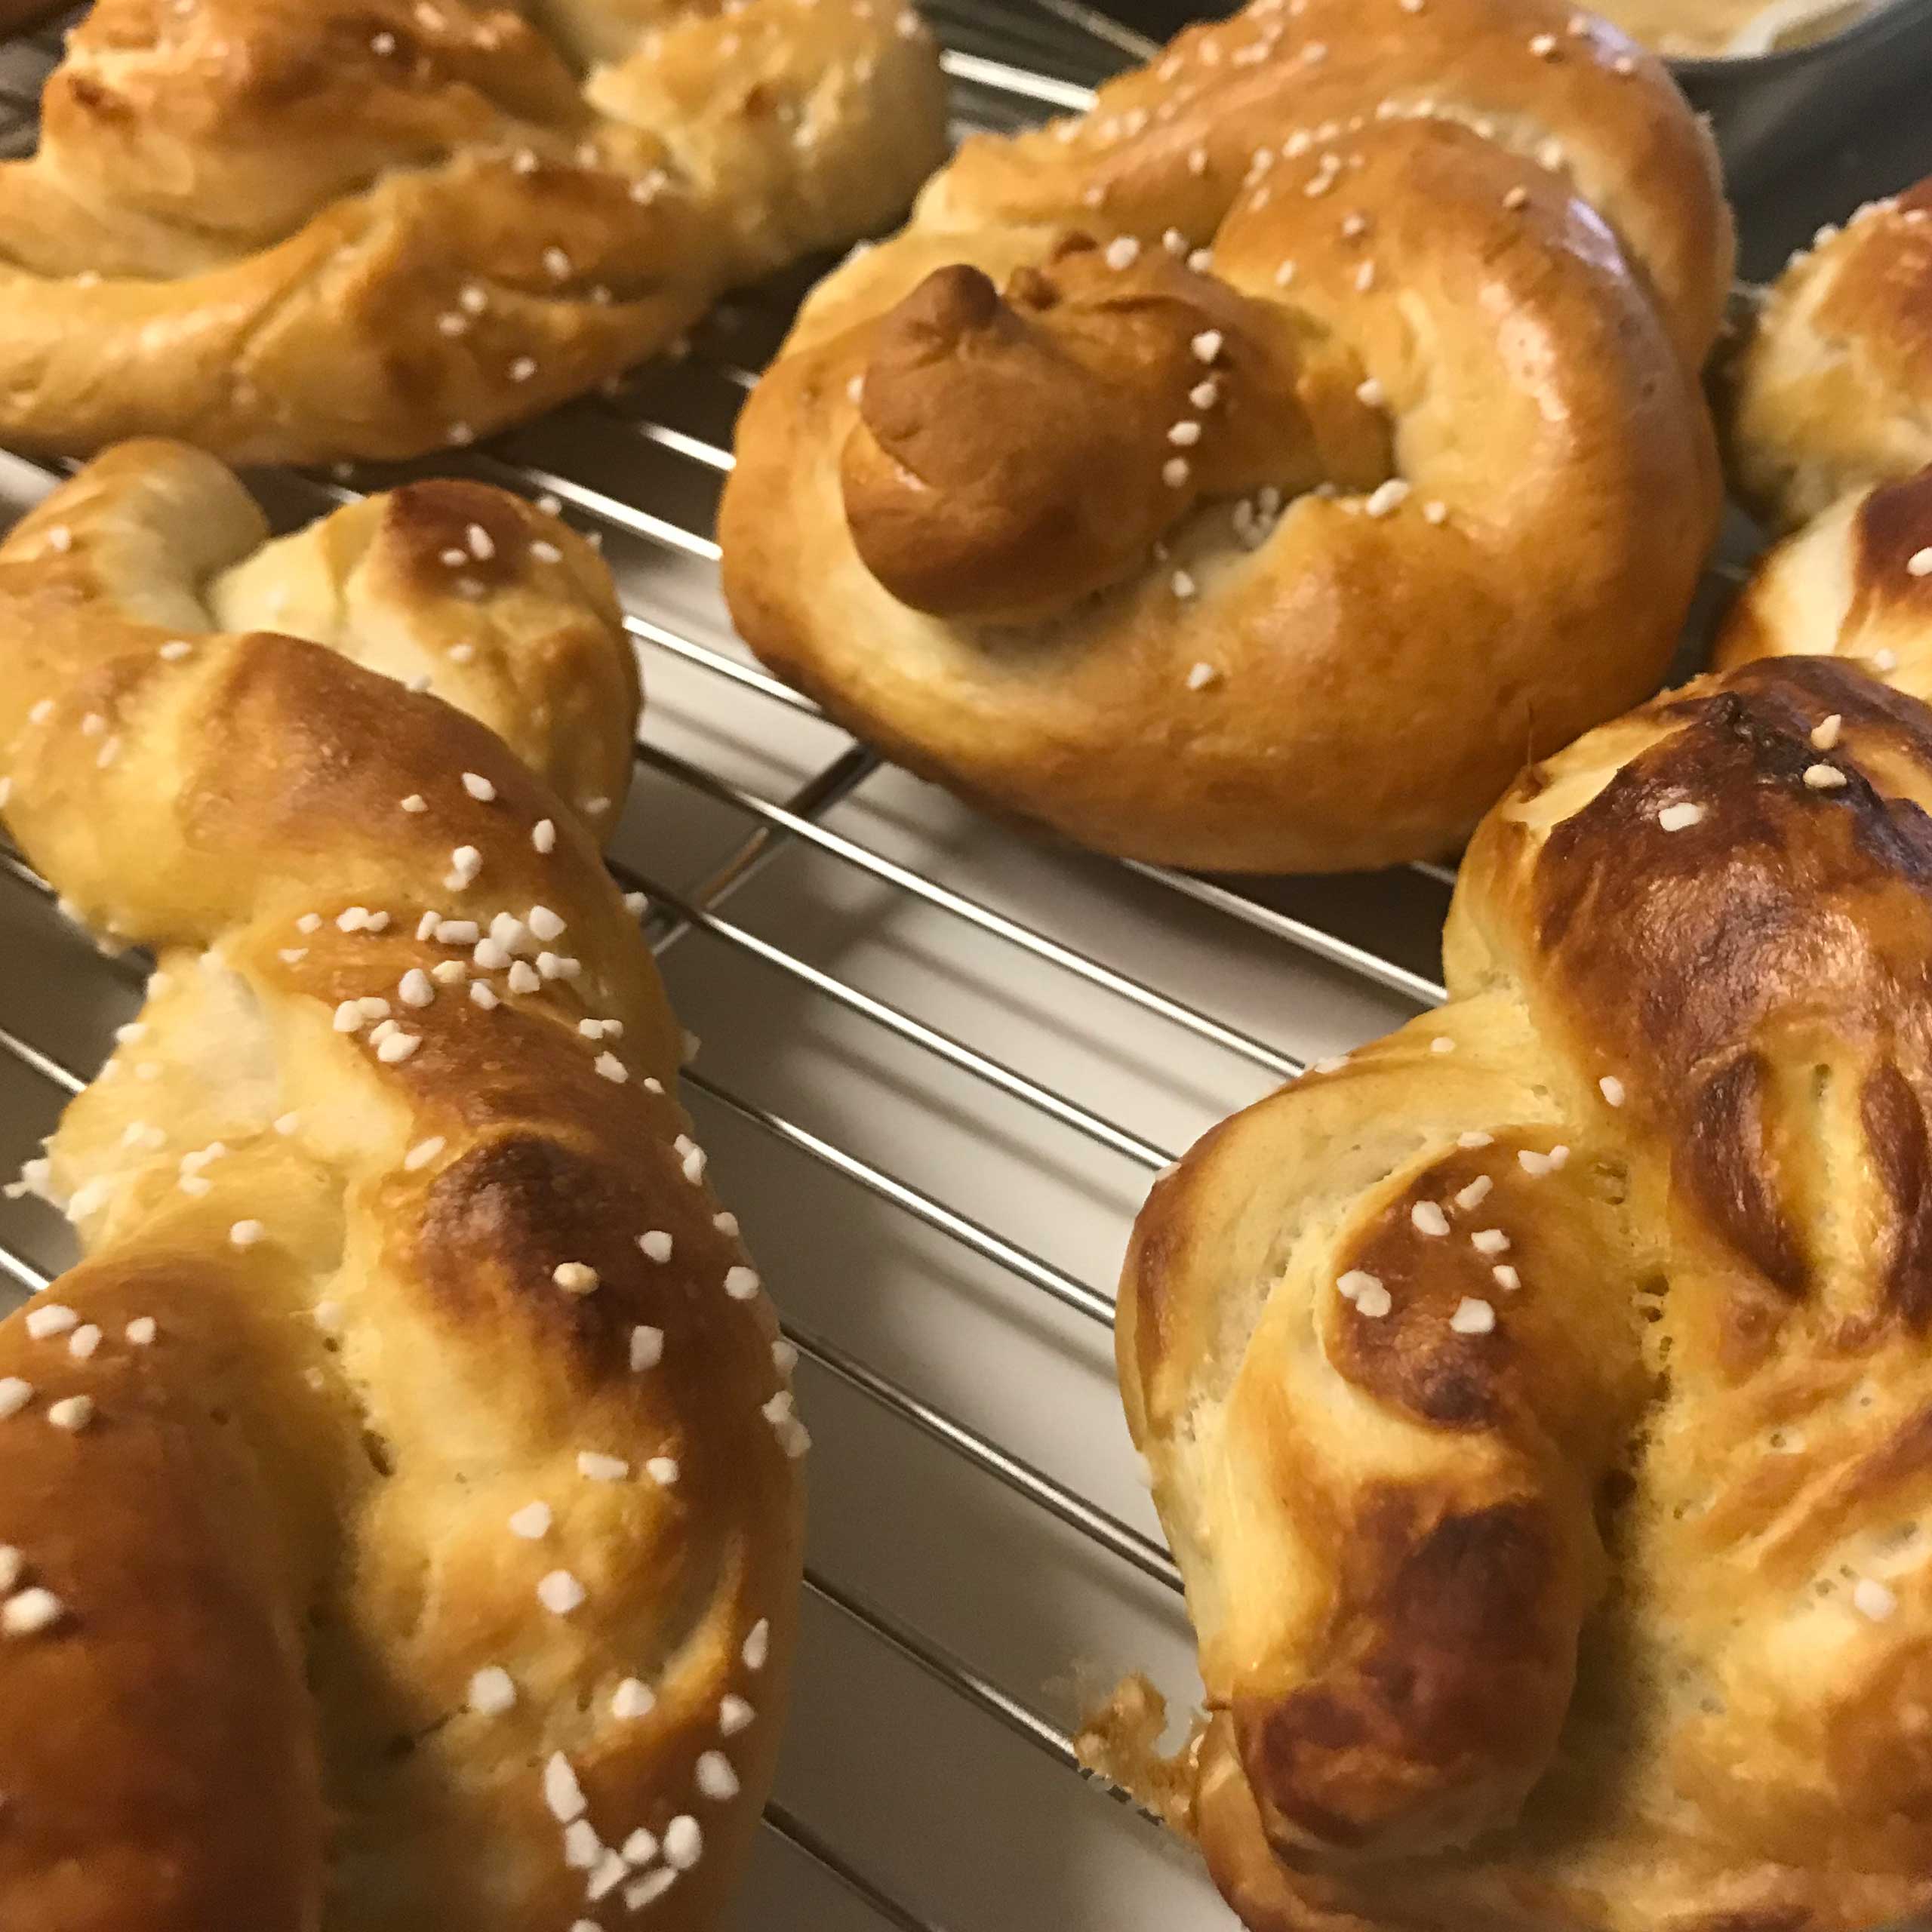 Homemade-Soft-Pretzels-with-Beer-Cheese-Sauce-15